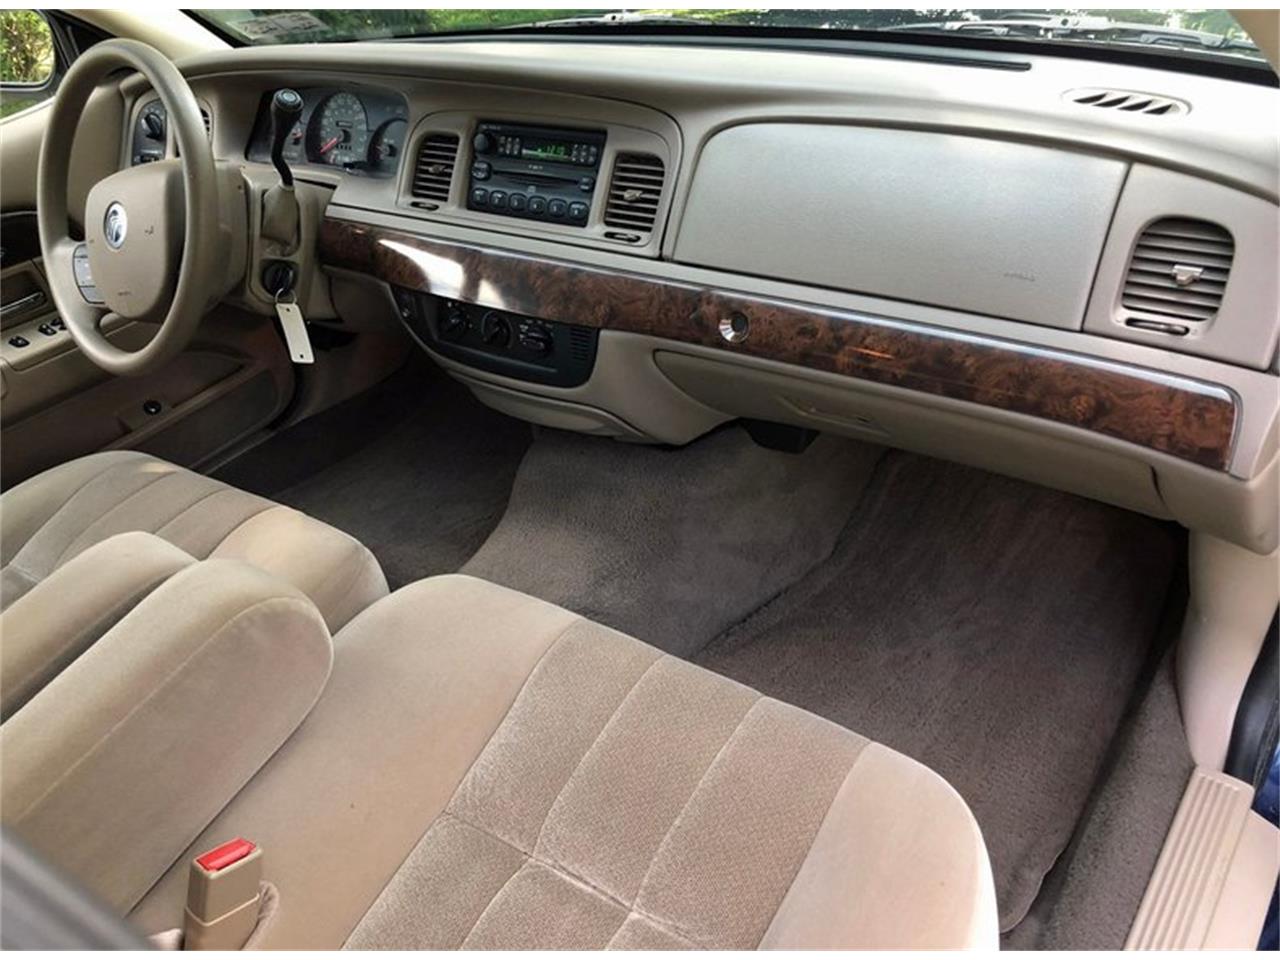 2005 Mercury Grand Marquis for sale in West Chester, PA – photo 56